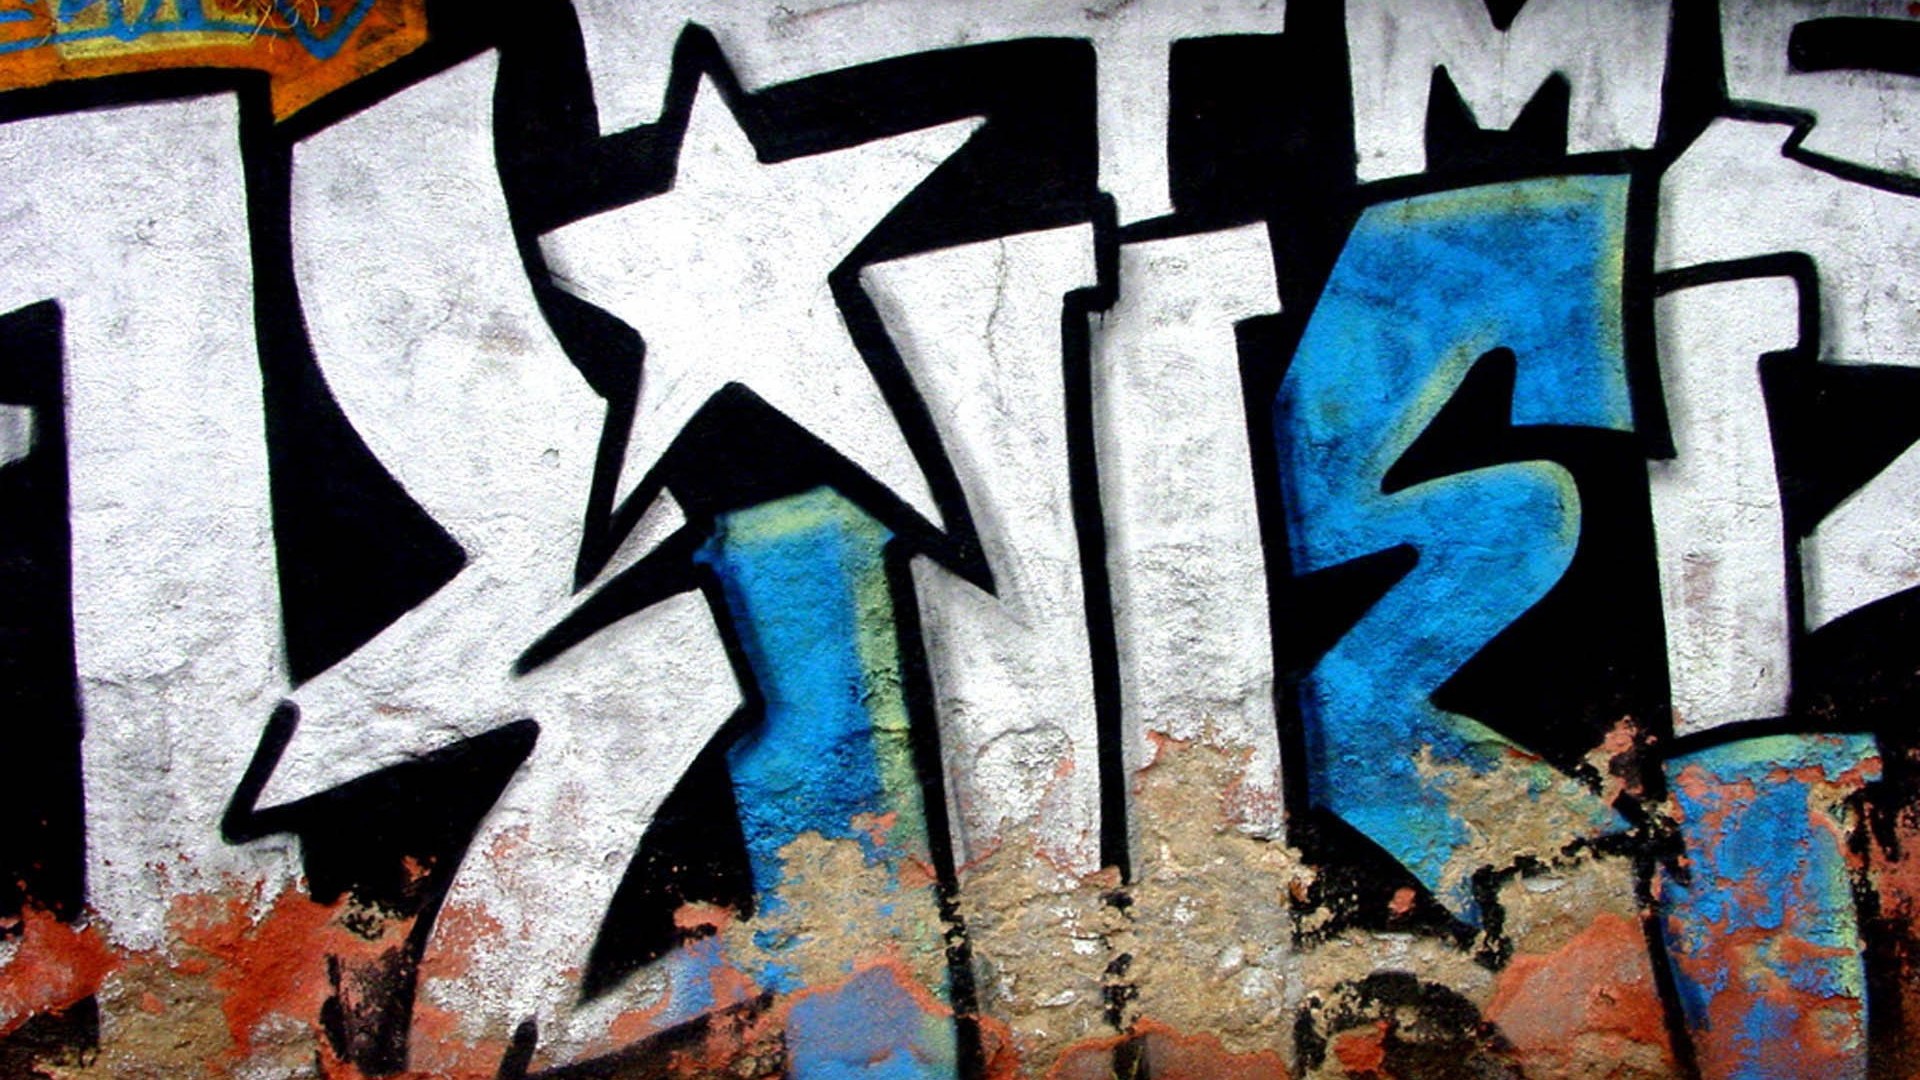 Graffiti Letters Desktop Backgrounds HD with image resolution 1920x1080 pixel. You can use this wallpaper as background for your desktop Computer Screensavers, Android or iPhone smartphones